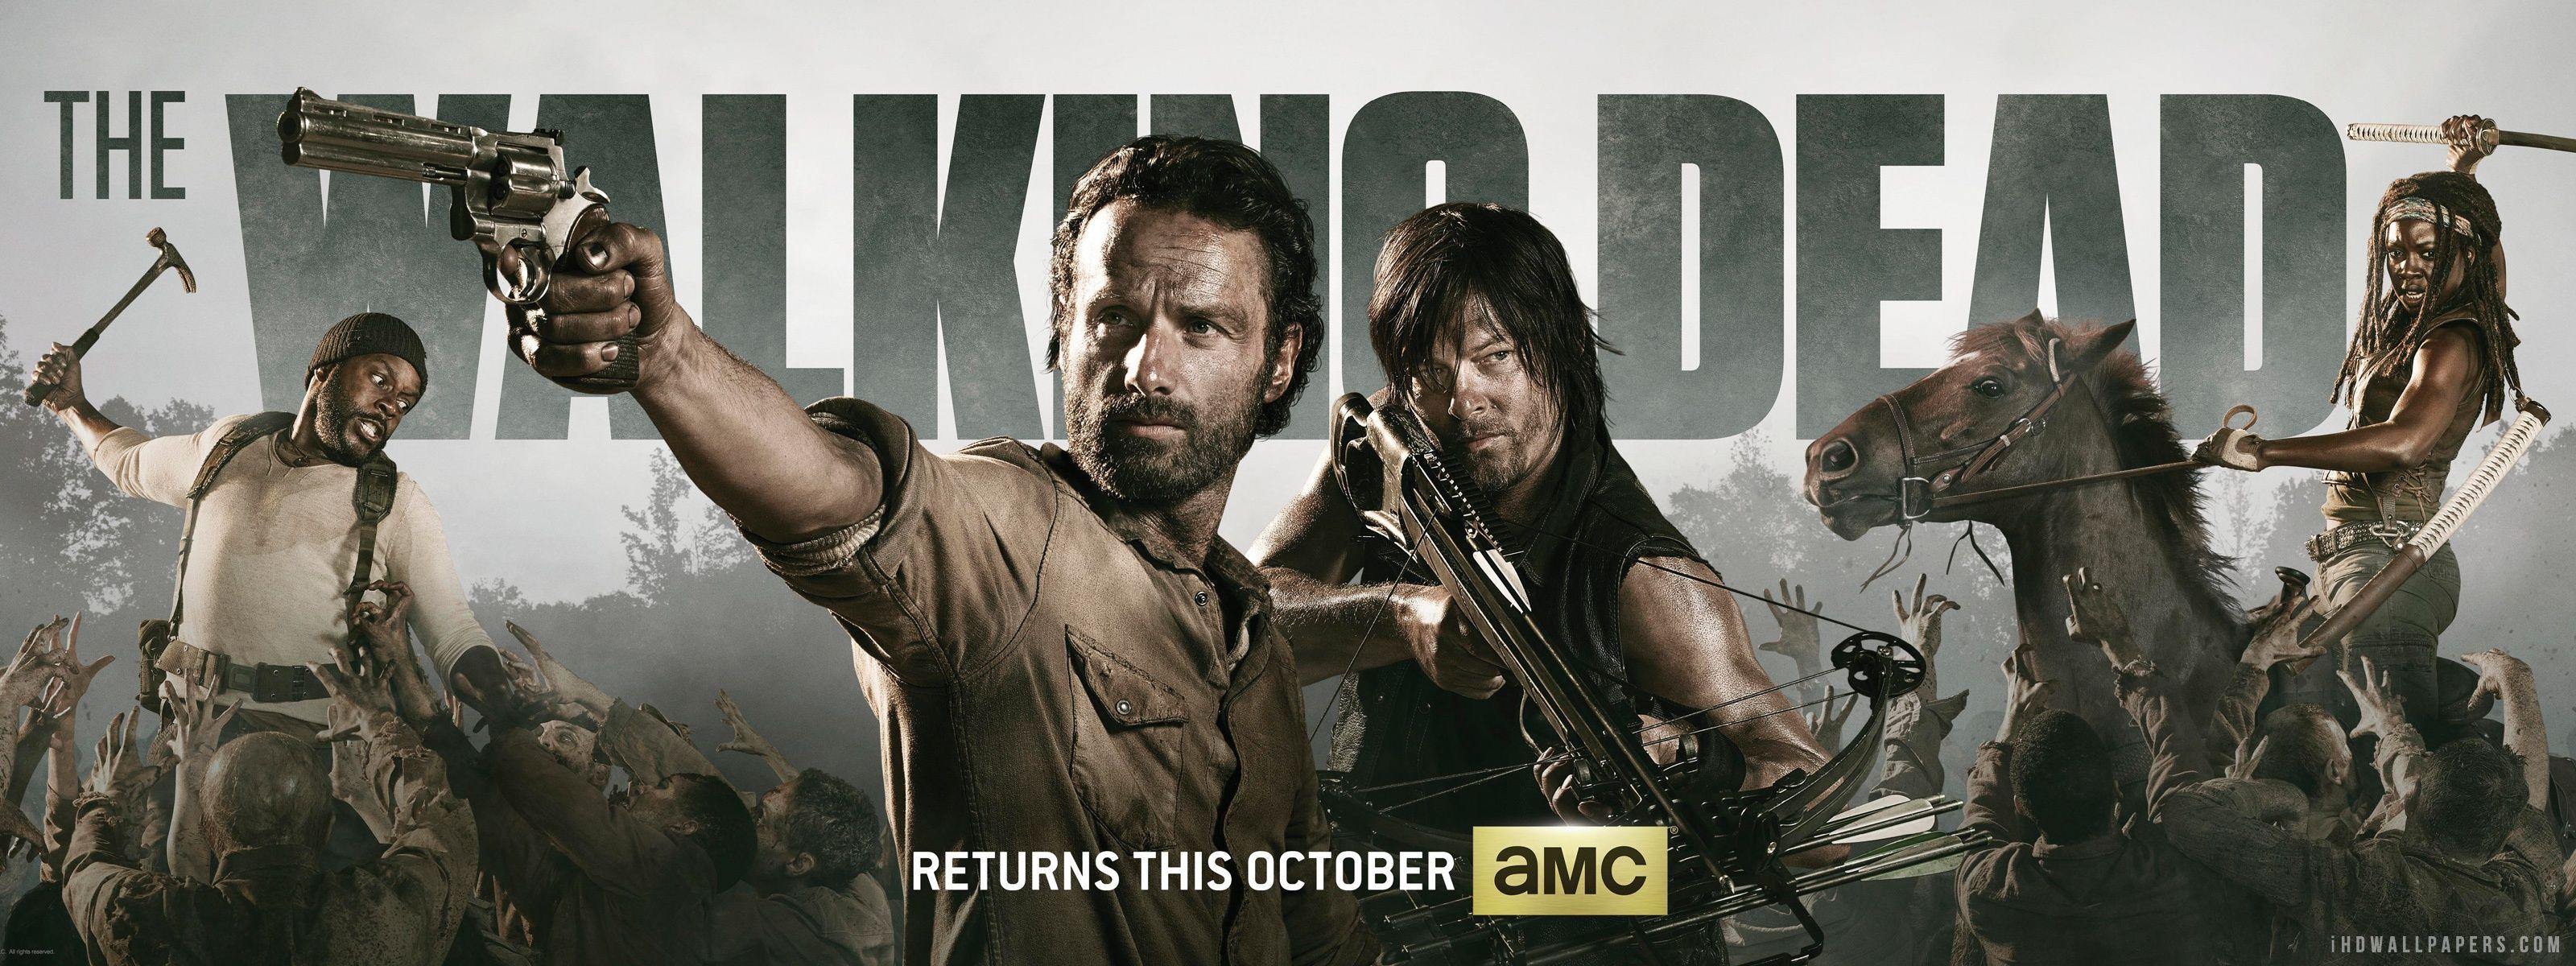 The Walking Dead season 4 gets underway in the States